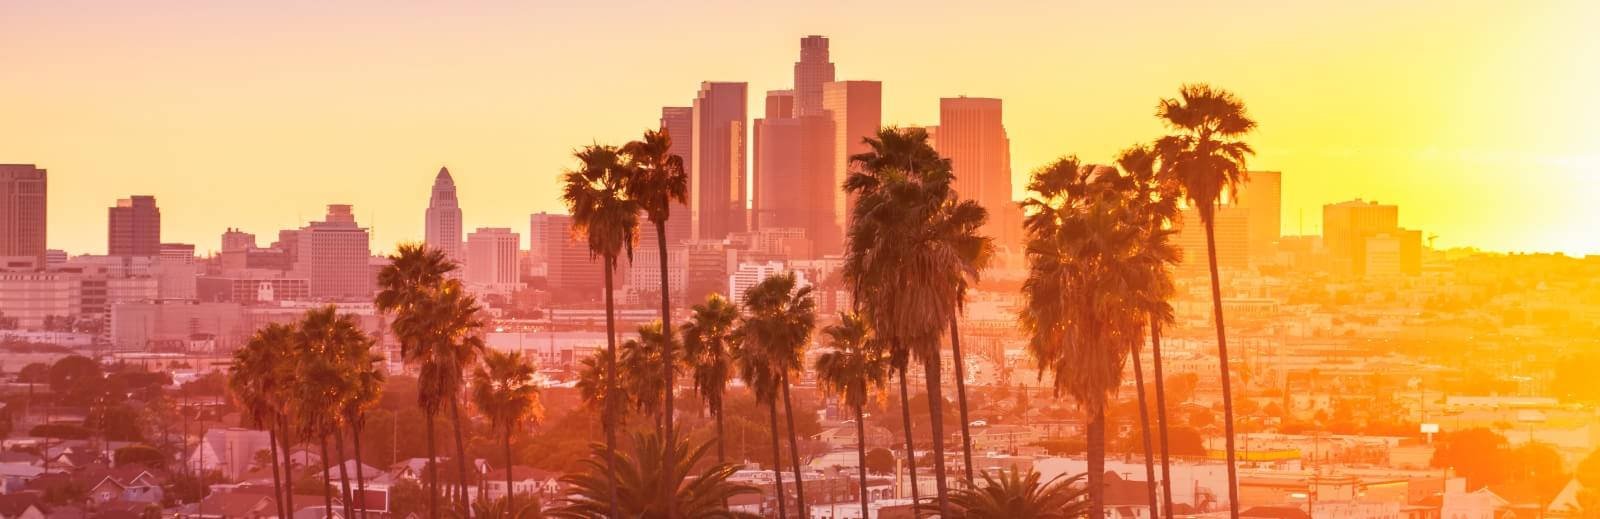 Los Angeles City Skyline During Sunset Background